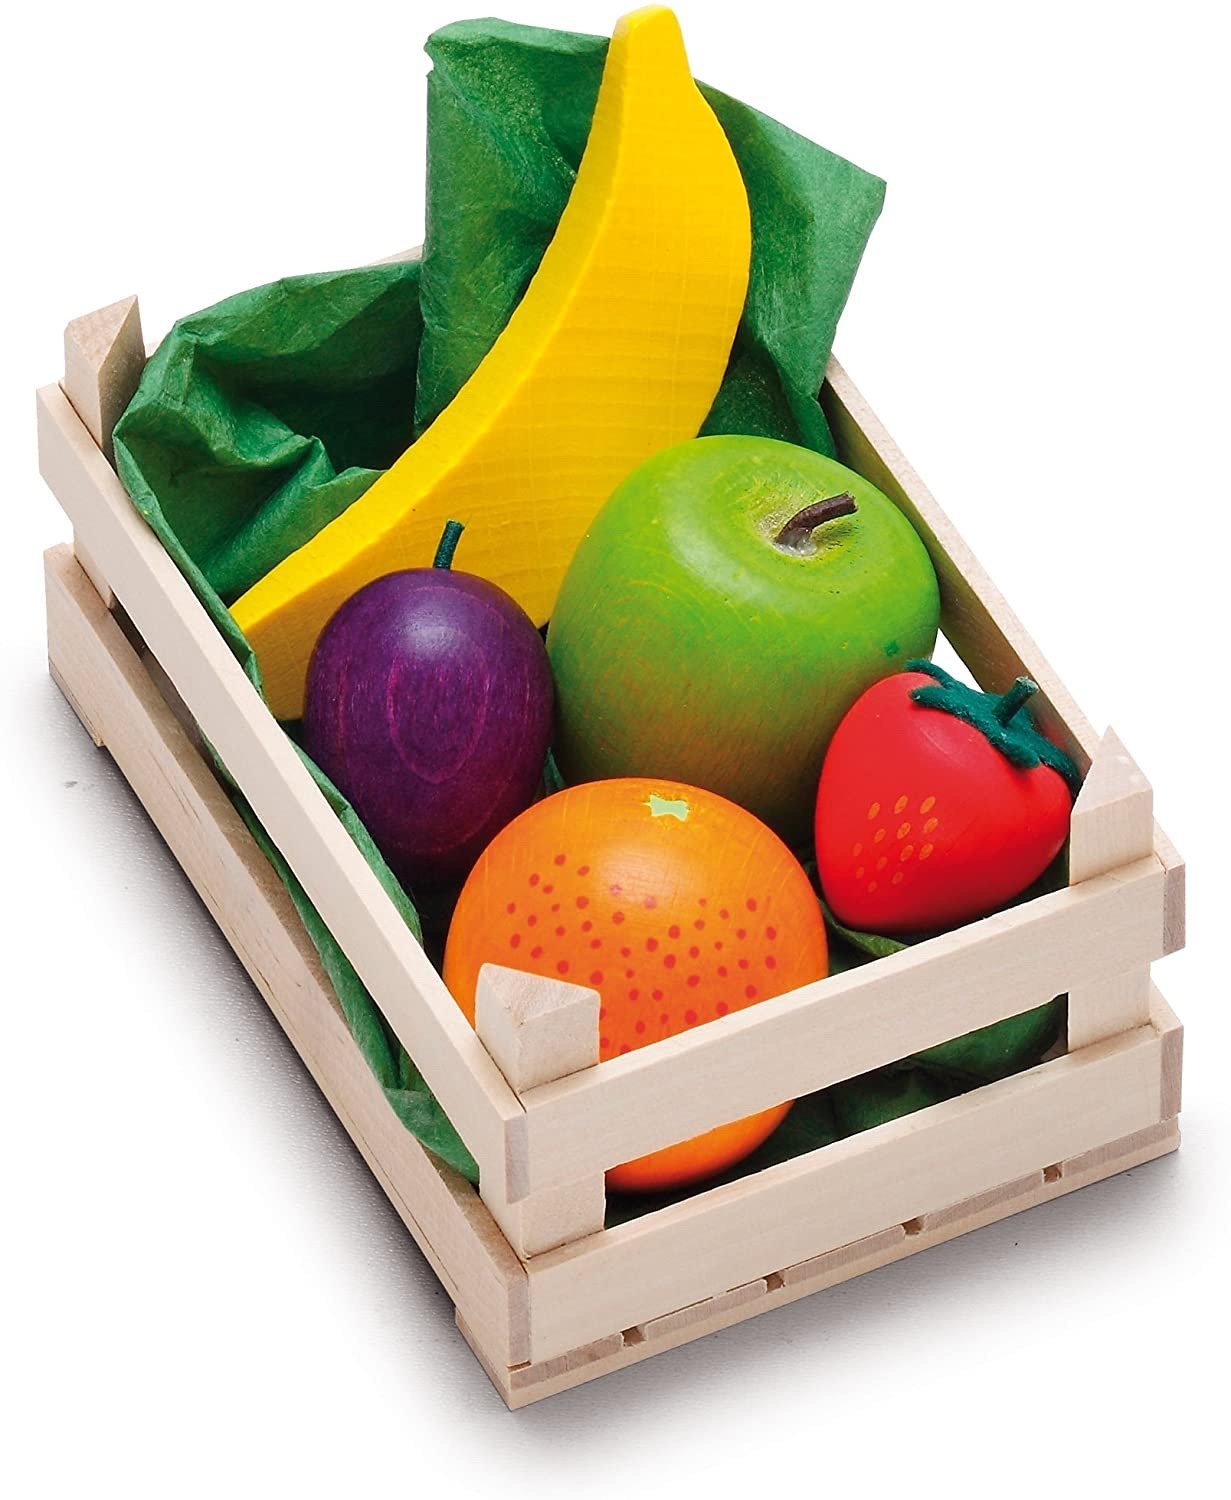 Assorted Wooden Fruits (Small) - Play Food Made in Germany - Wood Wood Toys Canada's Favourite Montessori Toy Store